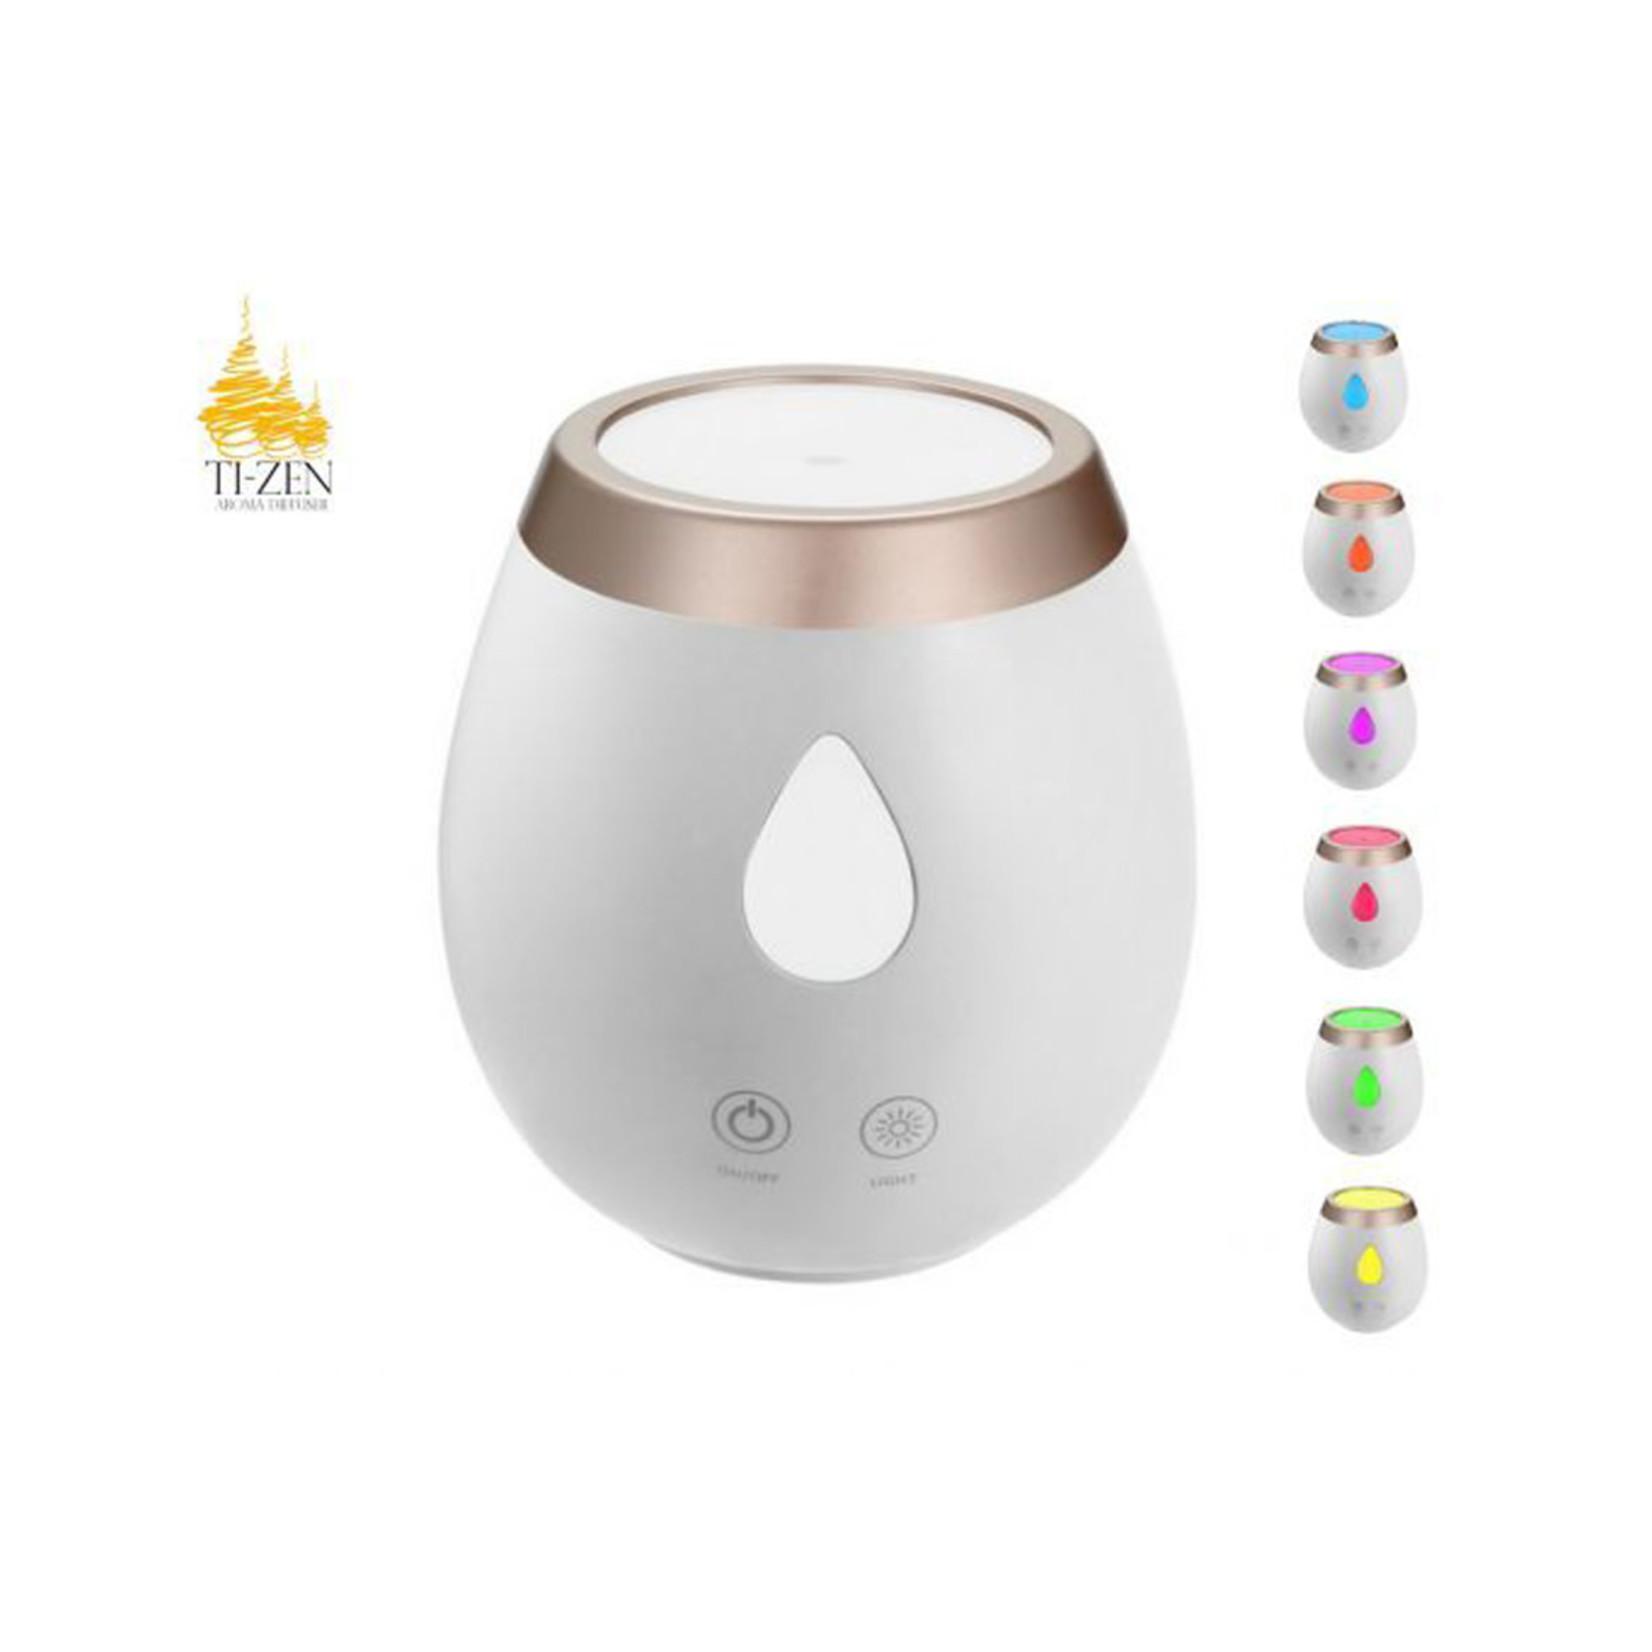 Aroma Diffuser Grote inhoud 300 ML 220 Volt. (Changing colors)